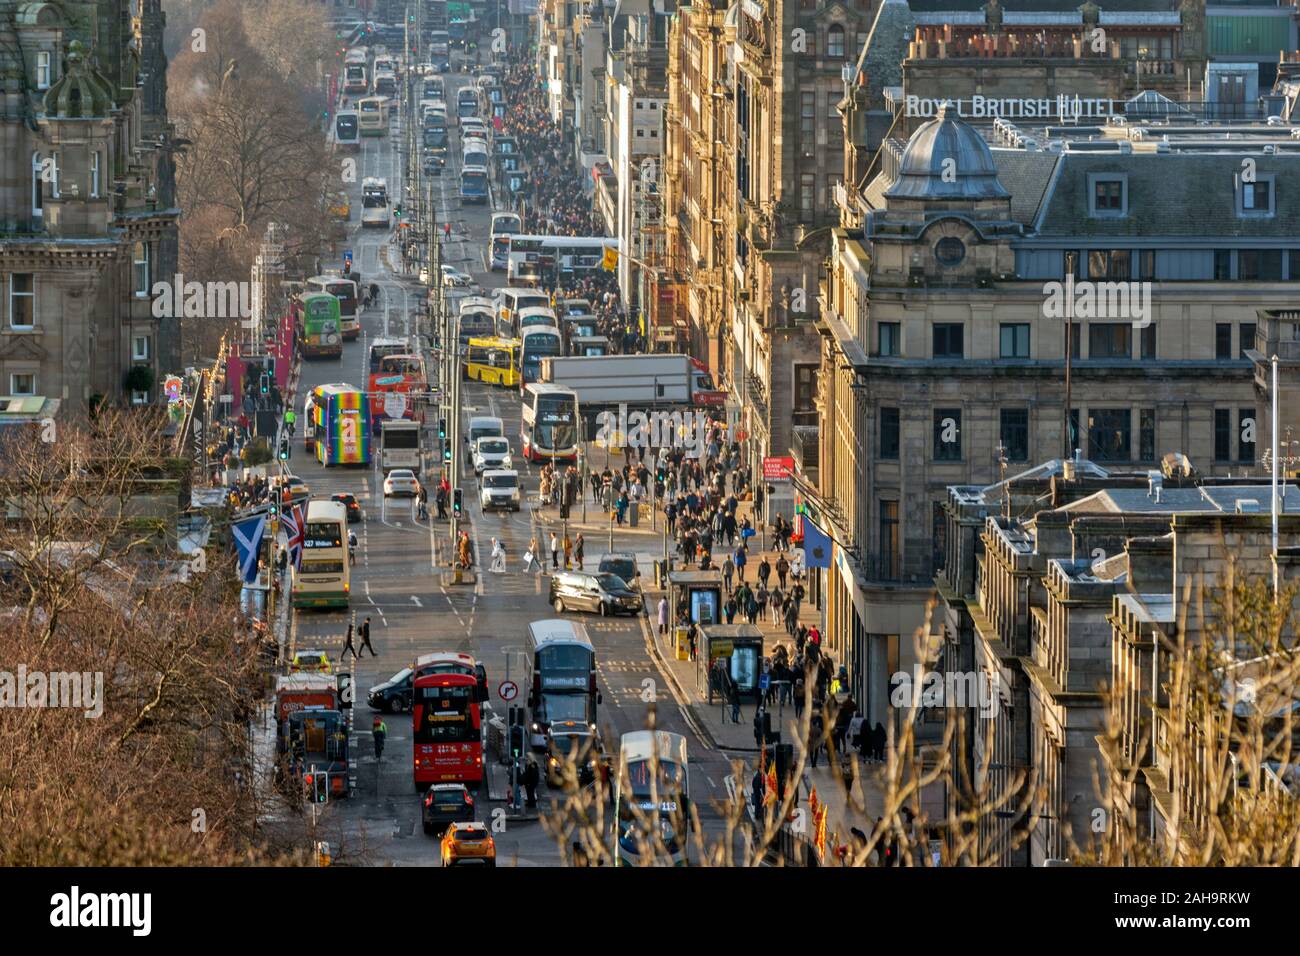 EDINBURGH SCOTLAND CITY VIEW PRINCES STREET WITH CROWDS ON THE PAVEMENT AND SEVERE TRAFFIC CONGESTION WITH APPROXIMATELY TWENTY BUSES Stock Photo